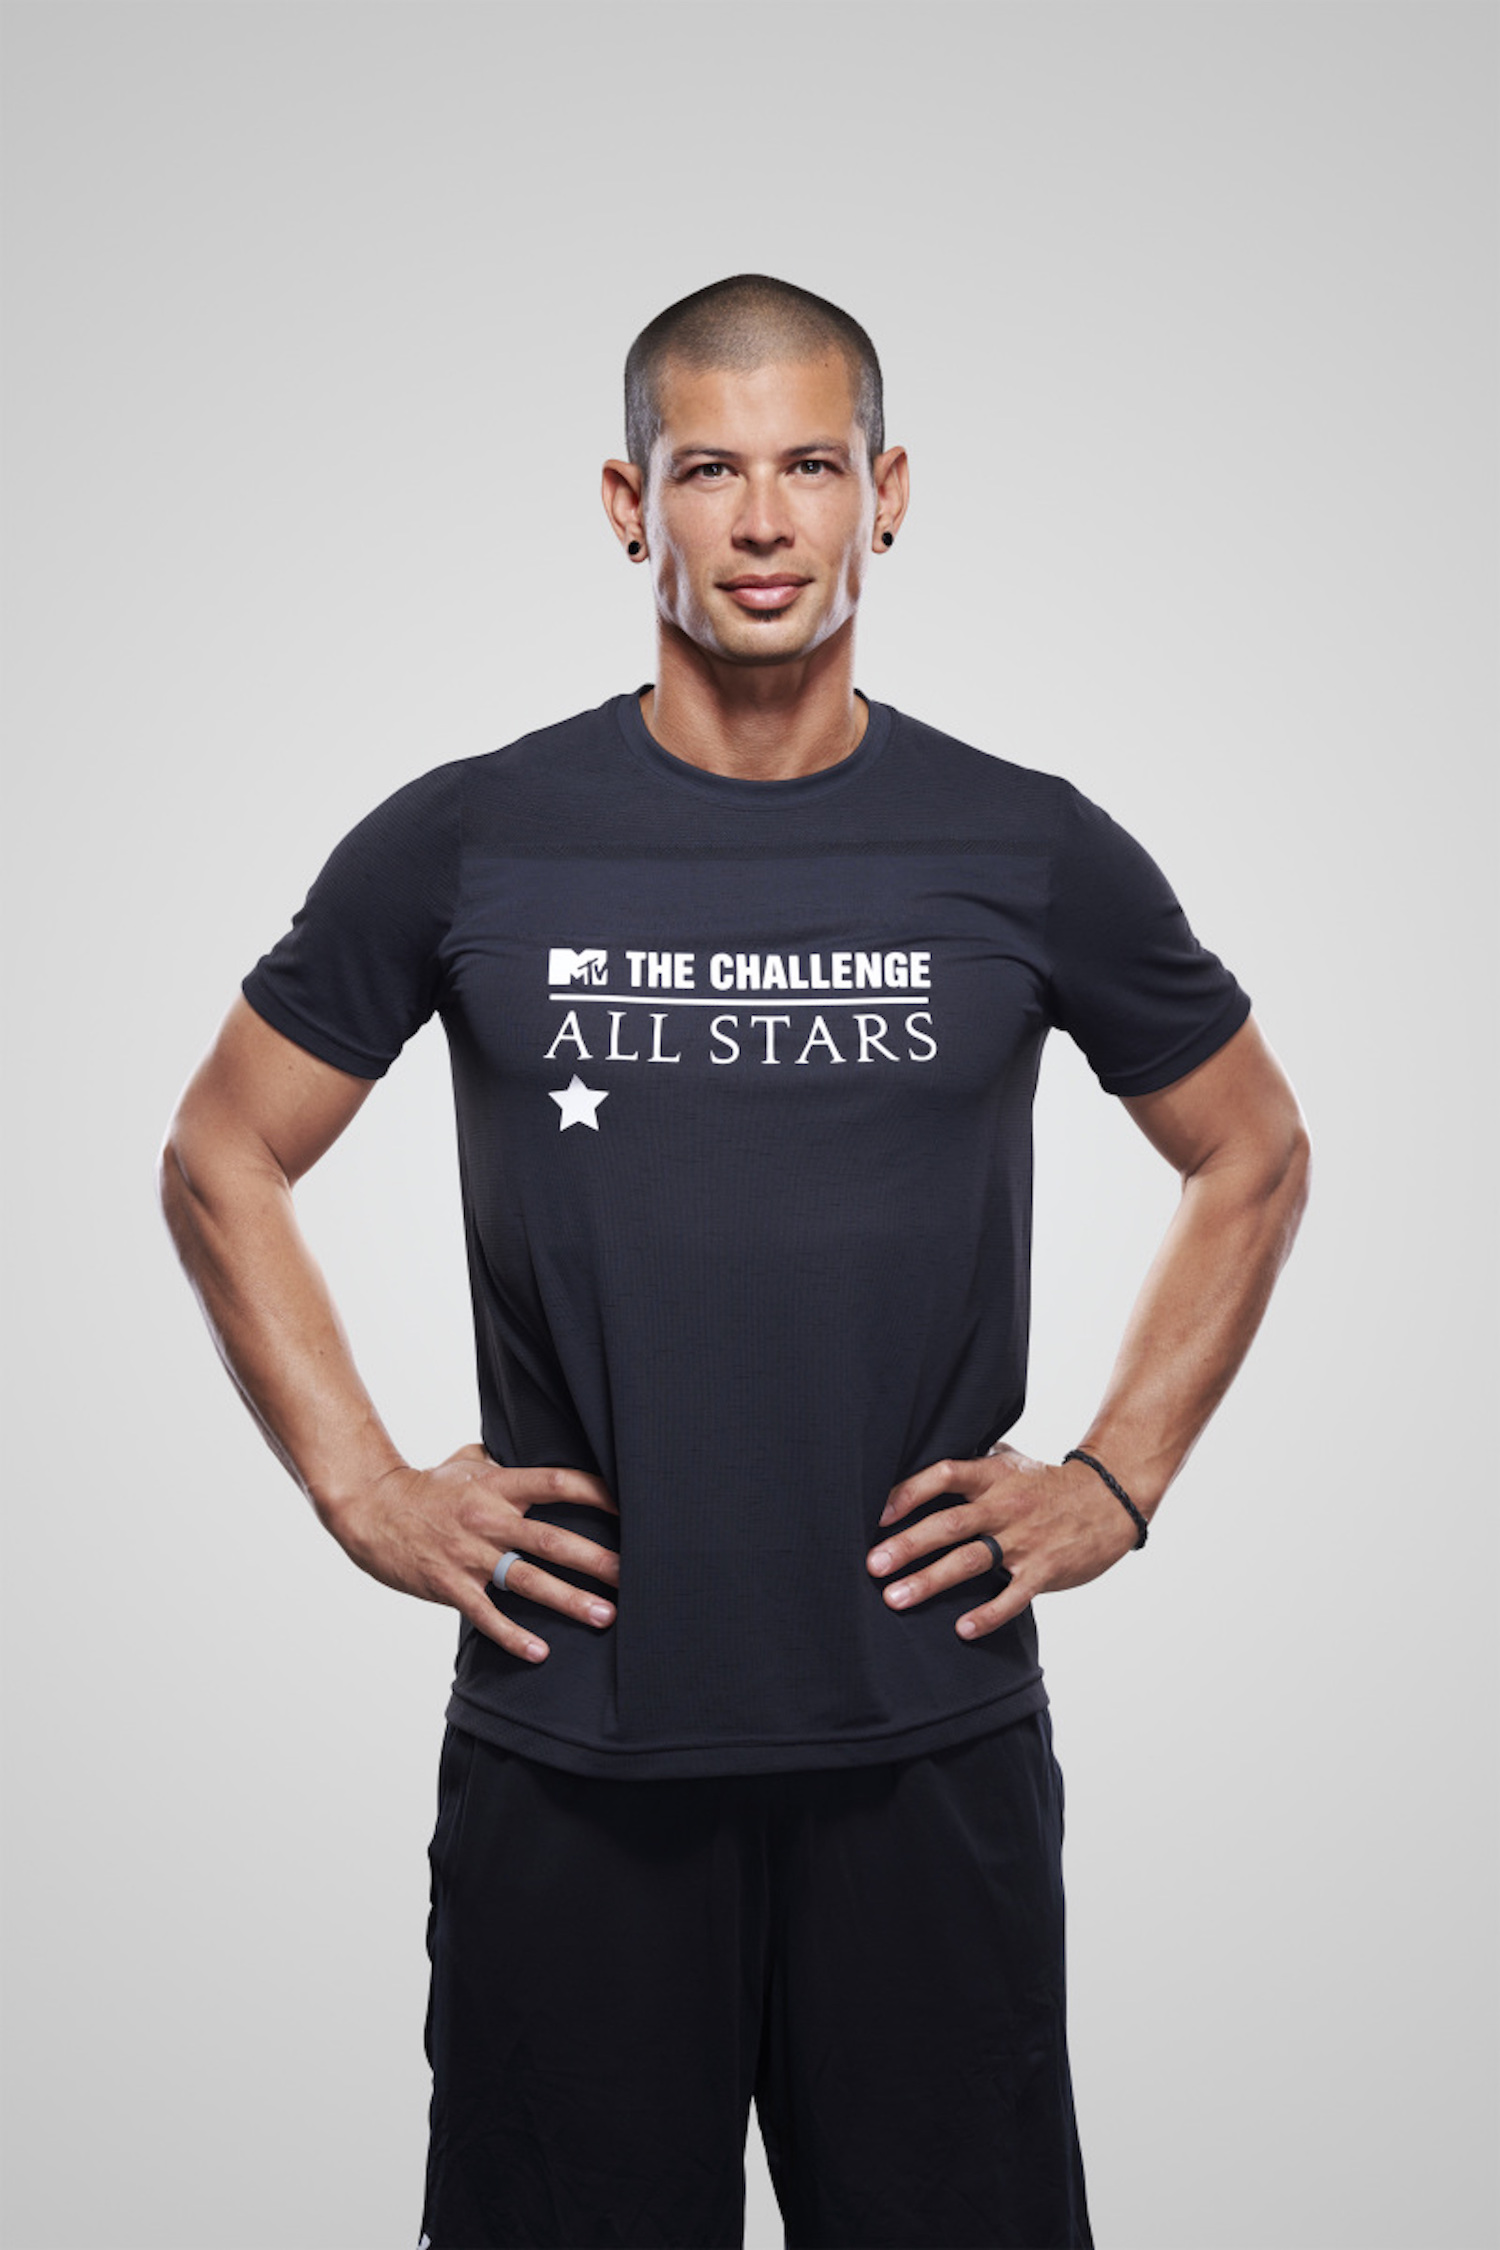 Yes in The Challenge: All Stars Season 3